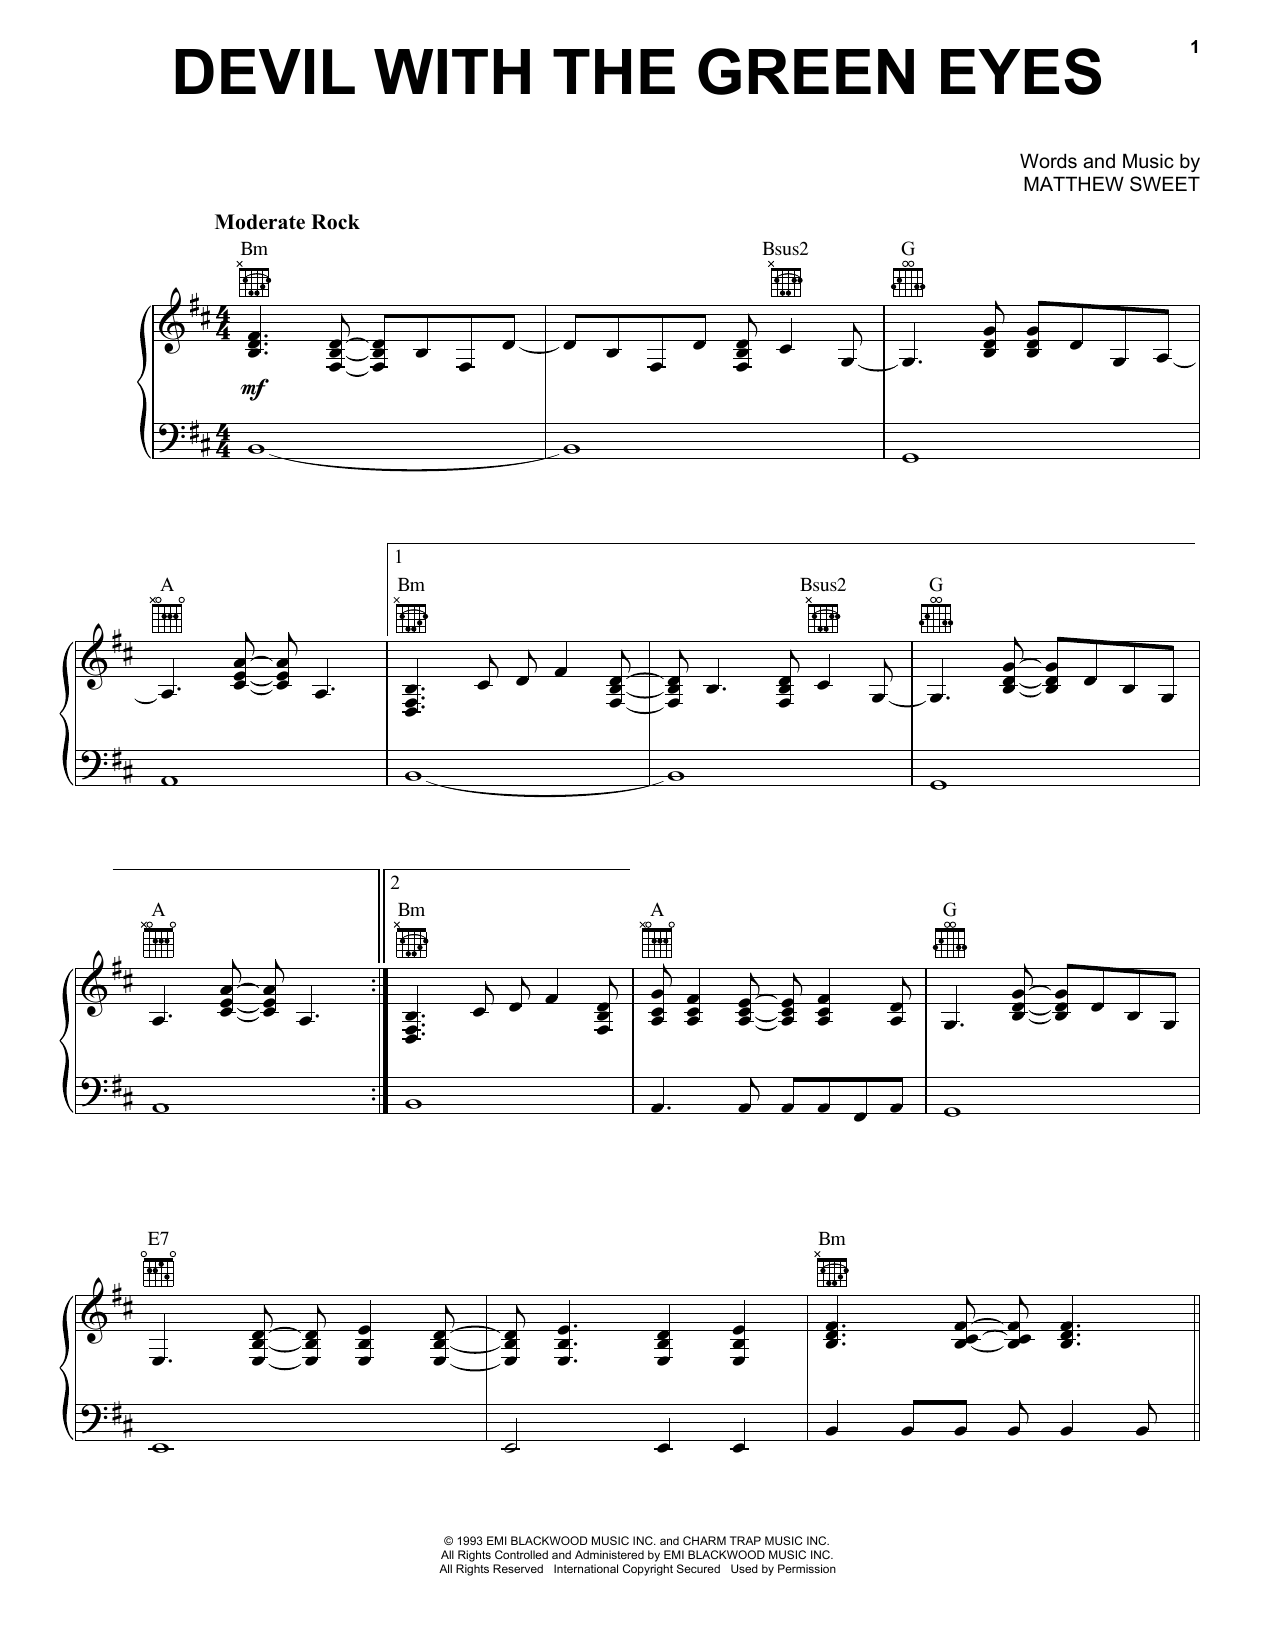 Download Matthew Sweet Devil With The Green Eyes Sheet Music